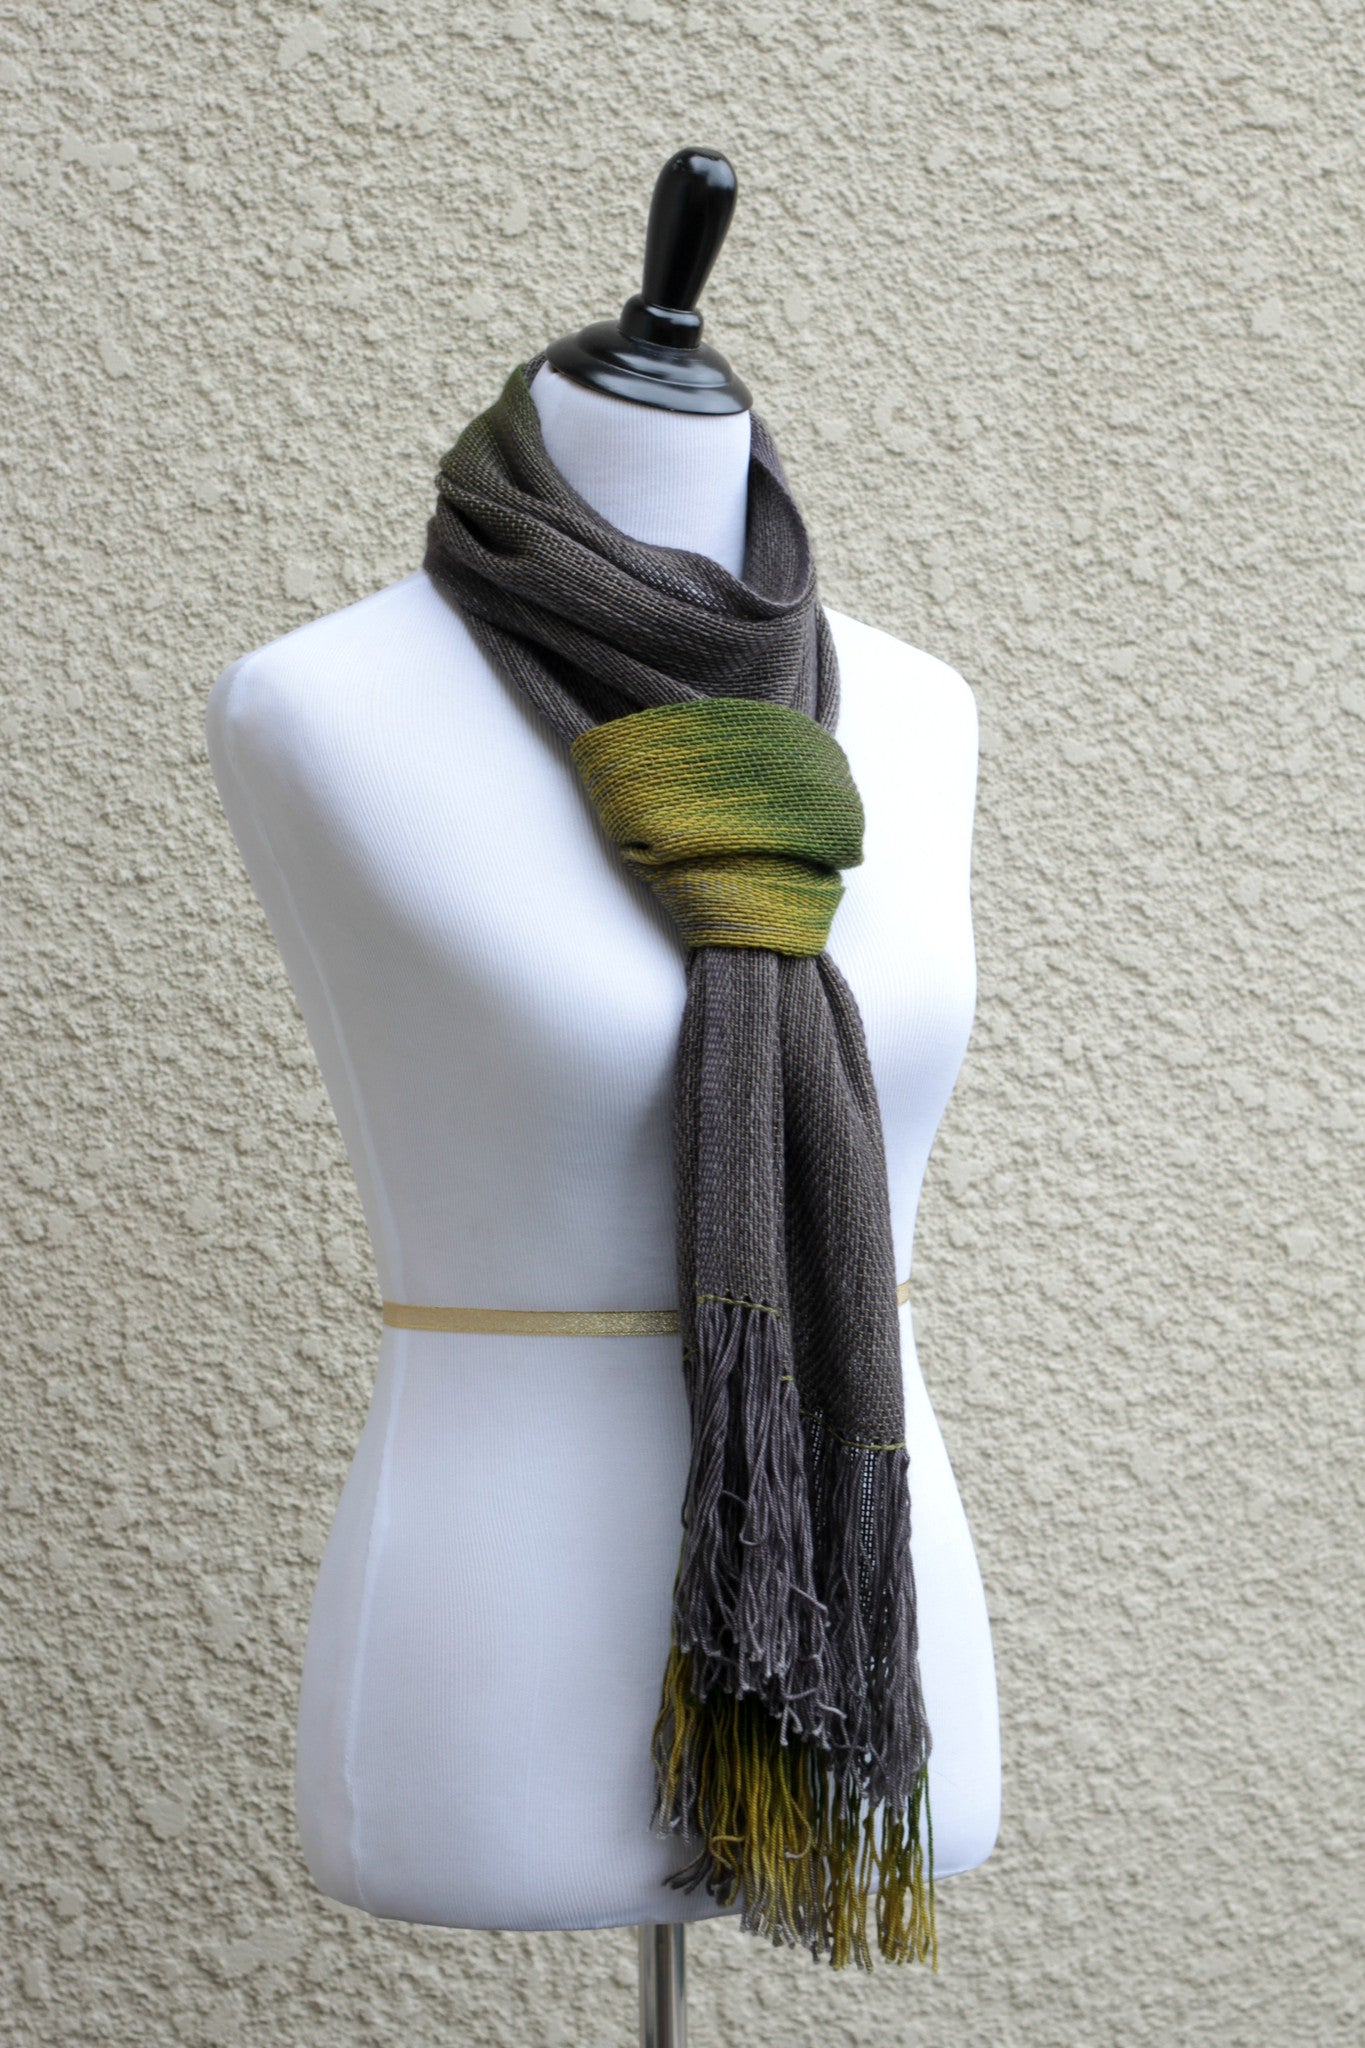 Woven grey and green scarf